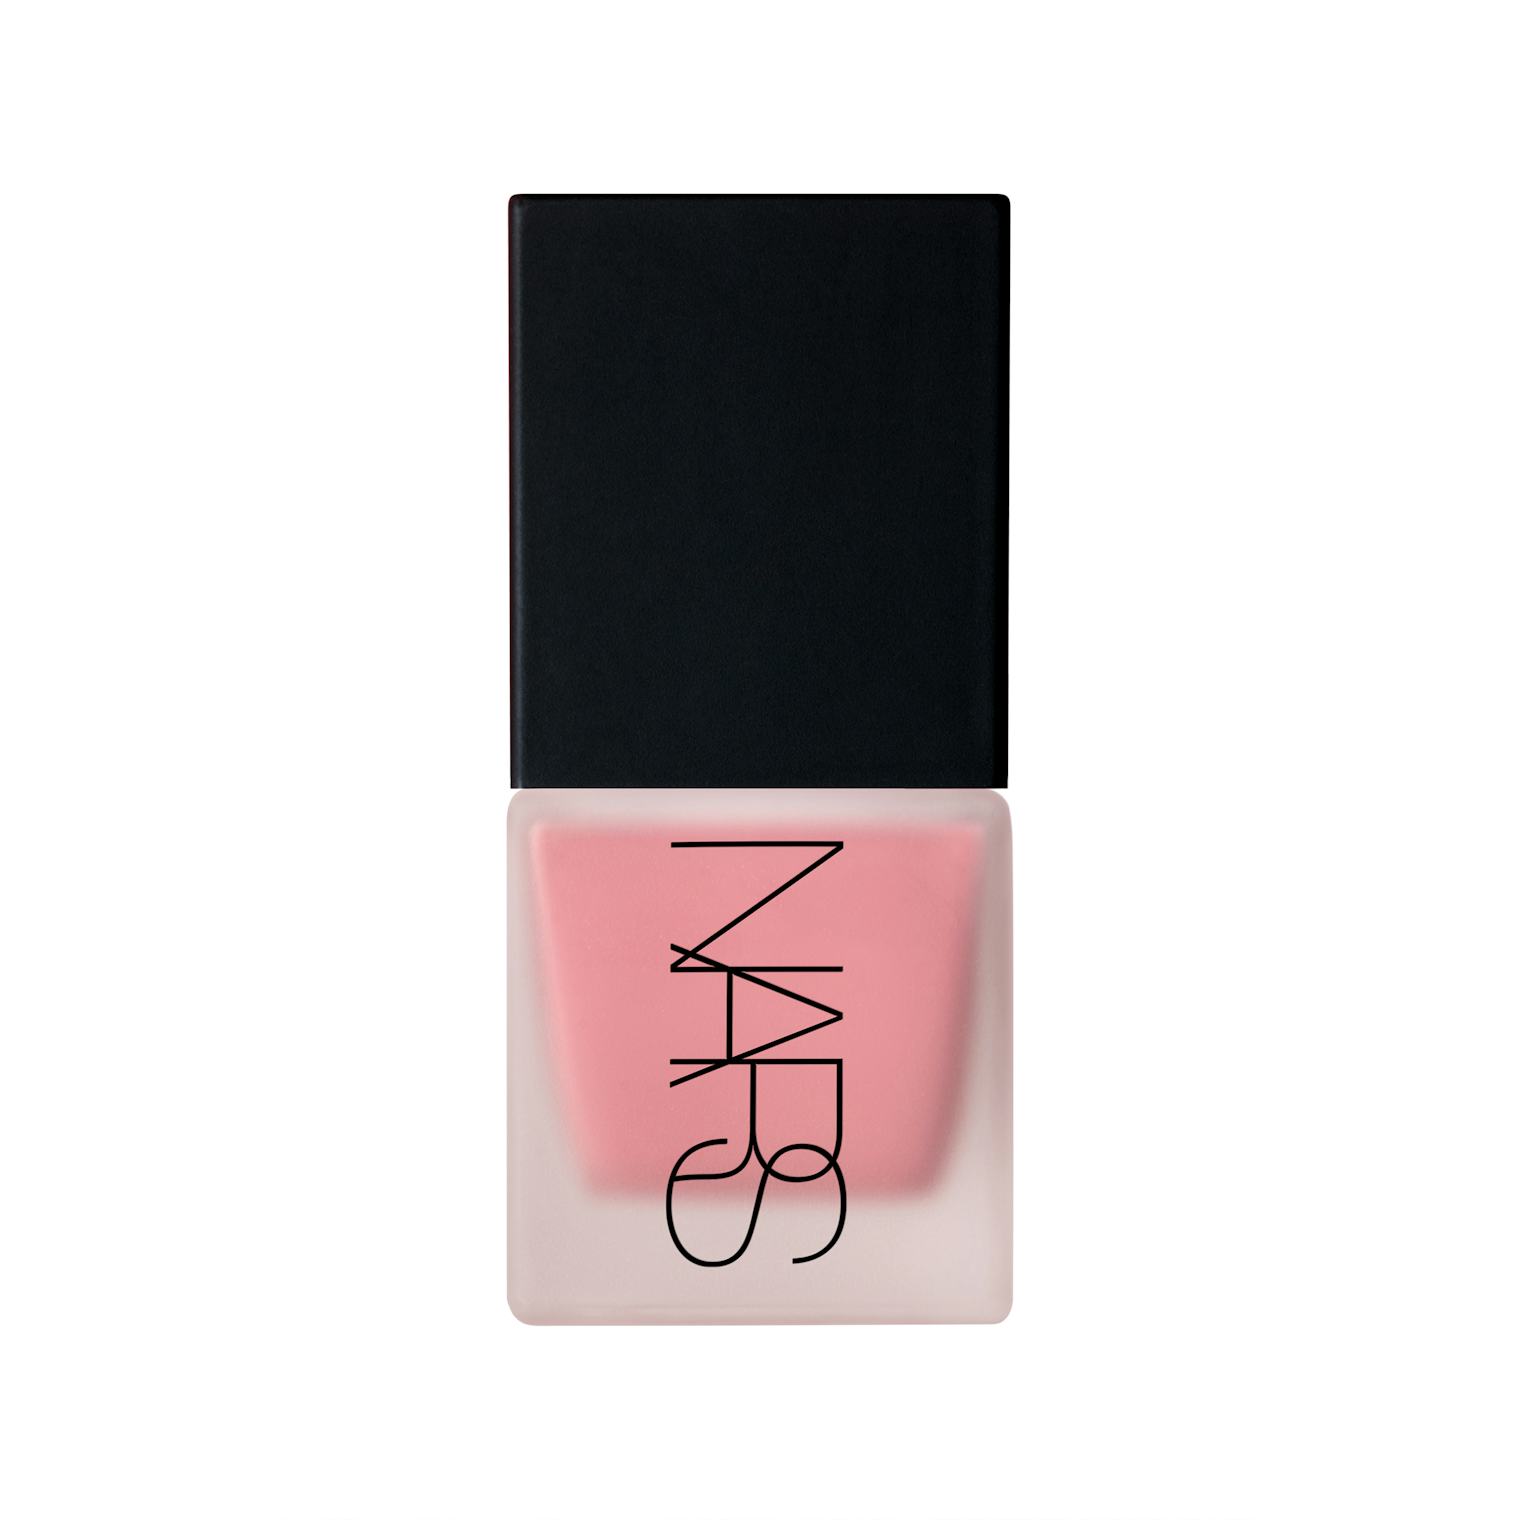 Is The Nars Orgasm Lipstick Worth It The Cult Classic Has Been Reimagined